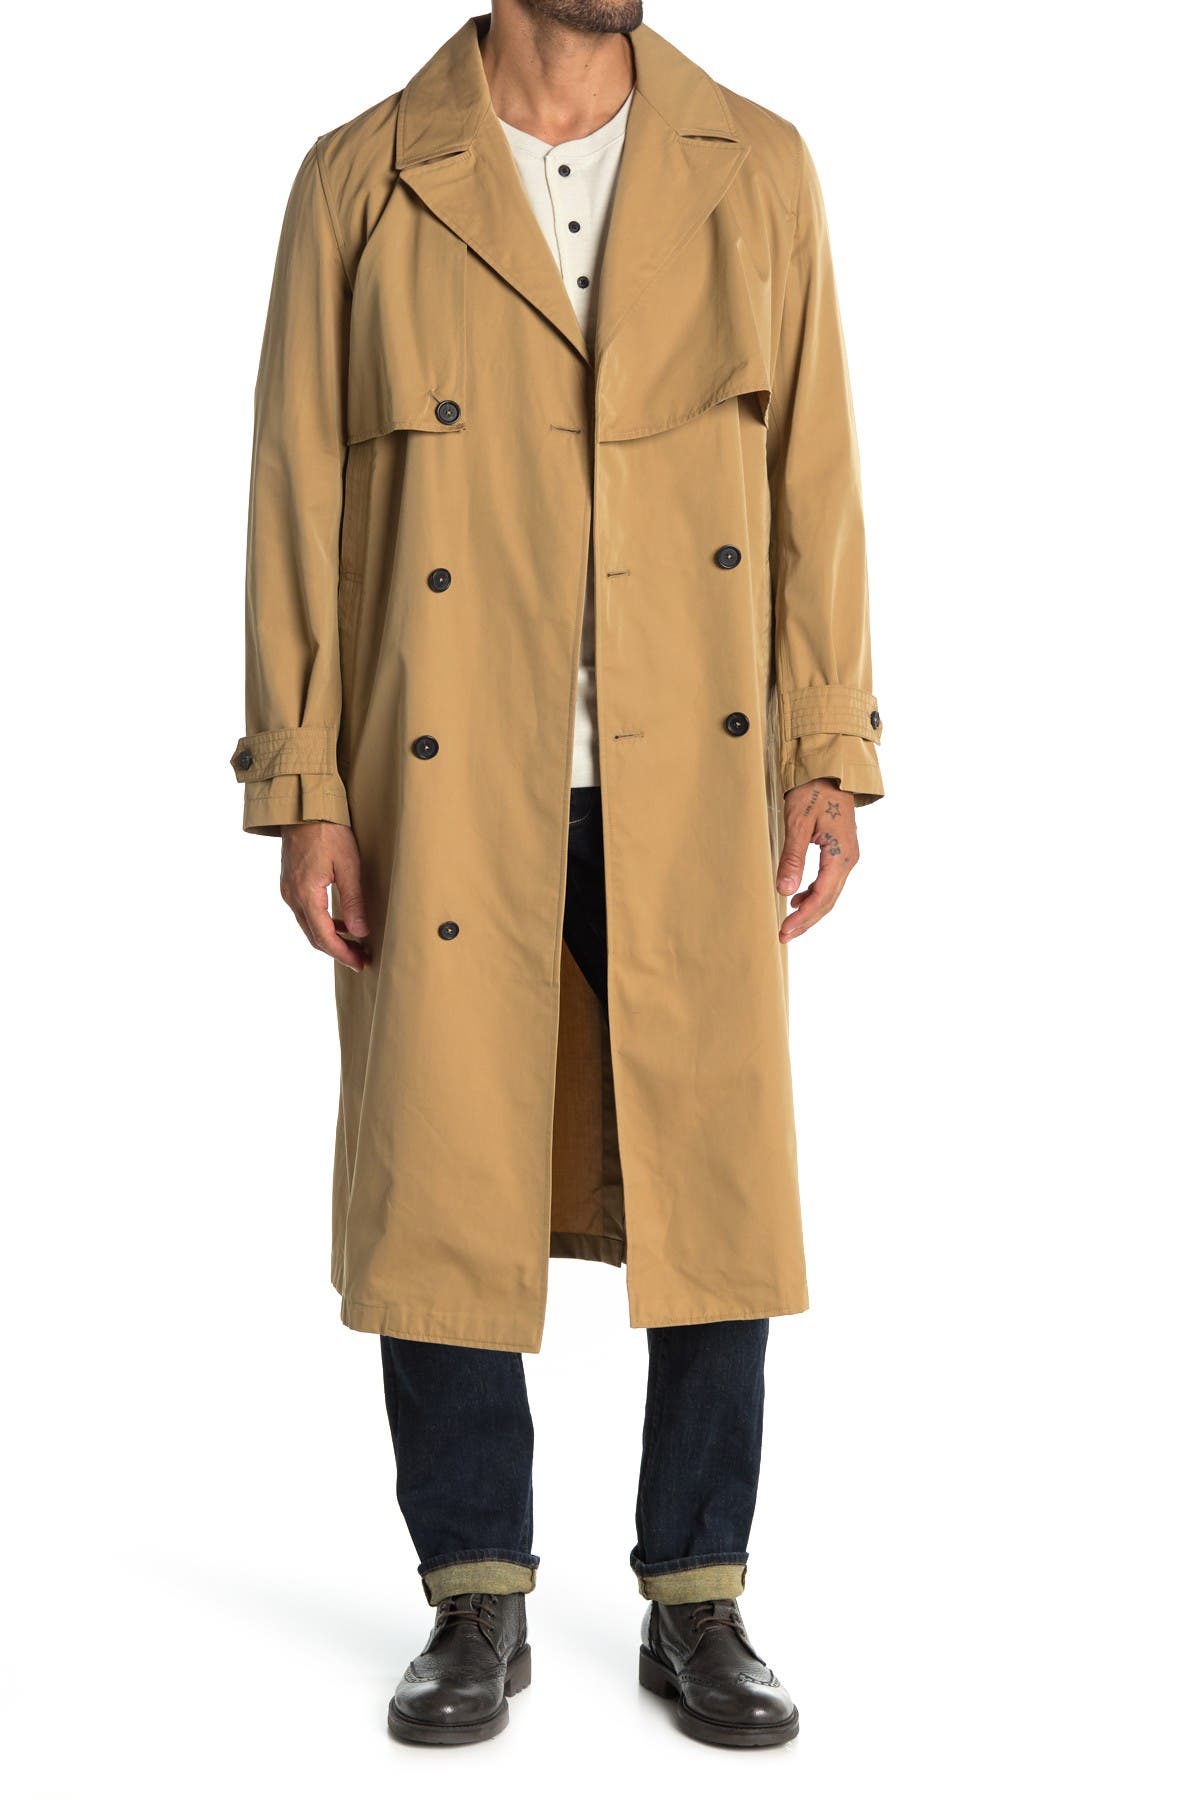 Billy Reid | Double Breasted Trench Coat | Nordstrom Rack